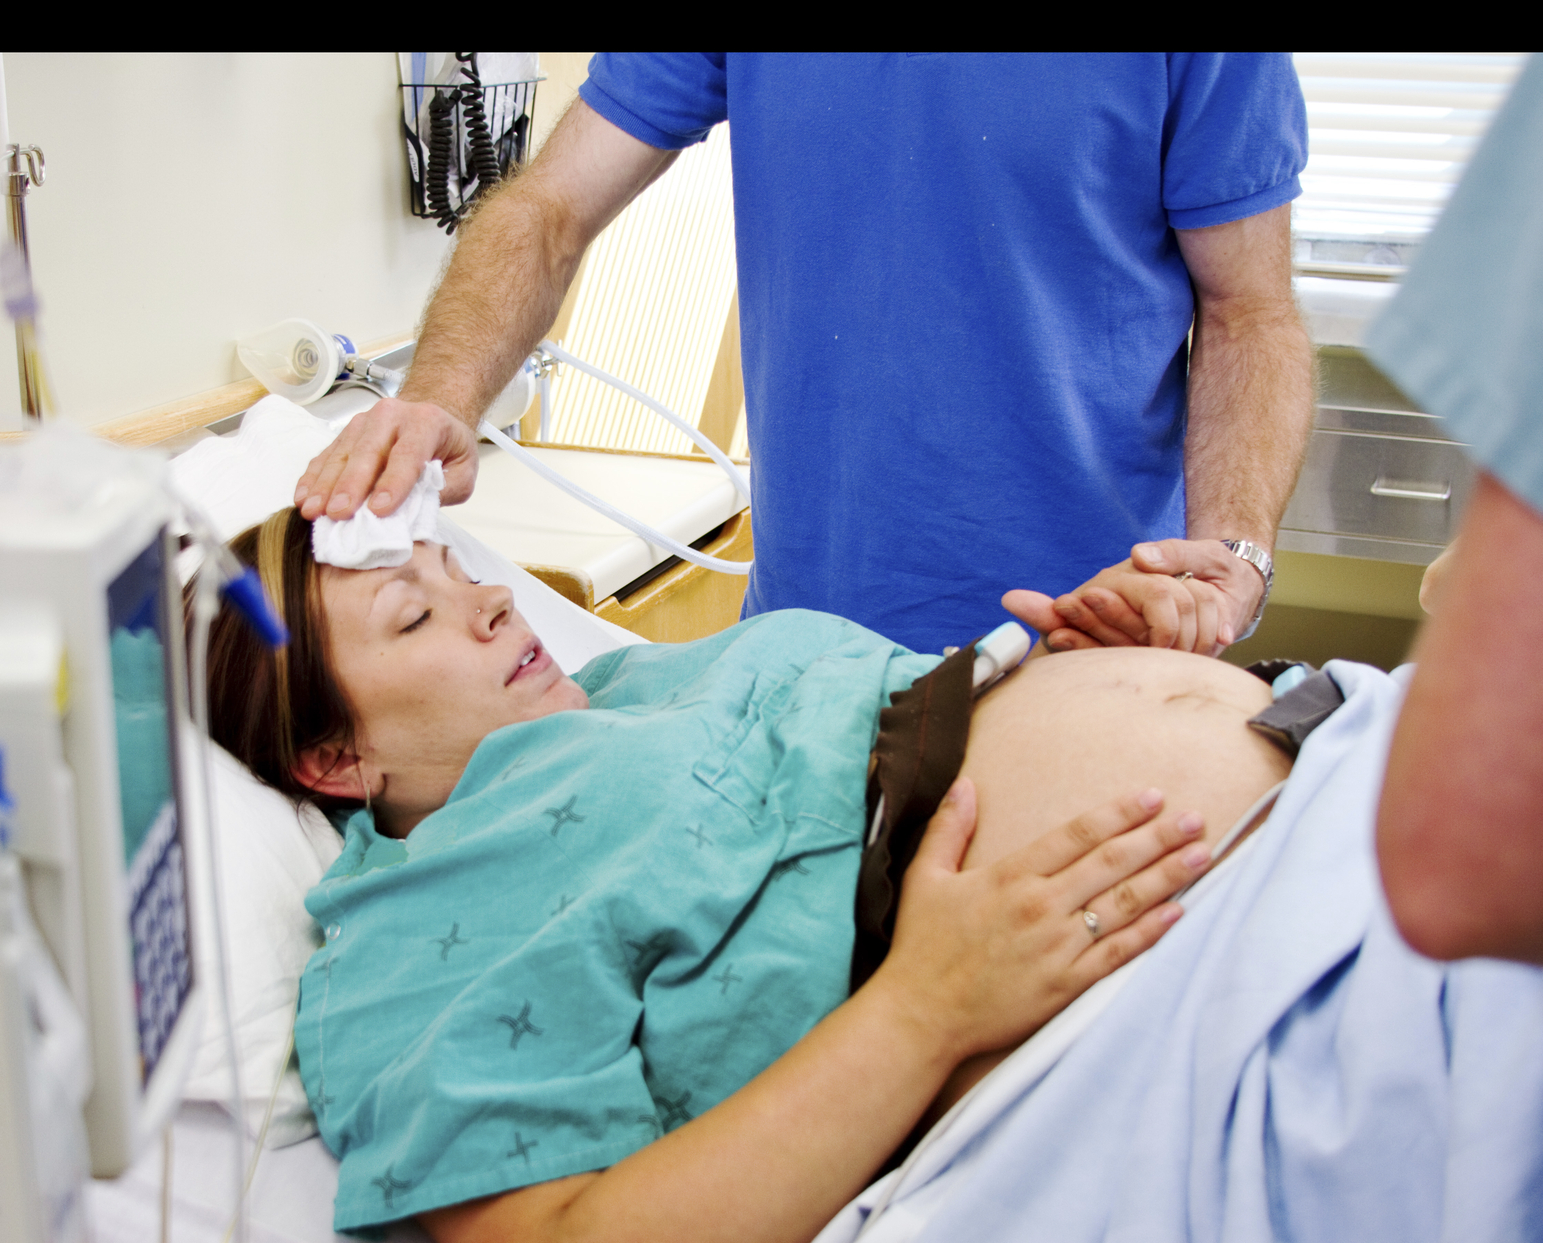 Maternity patient ready for delivery in hospital